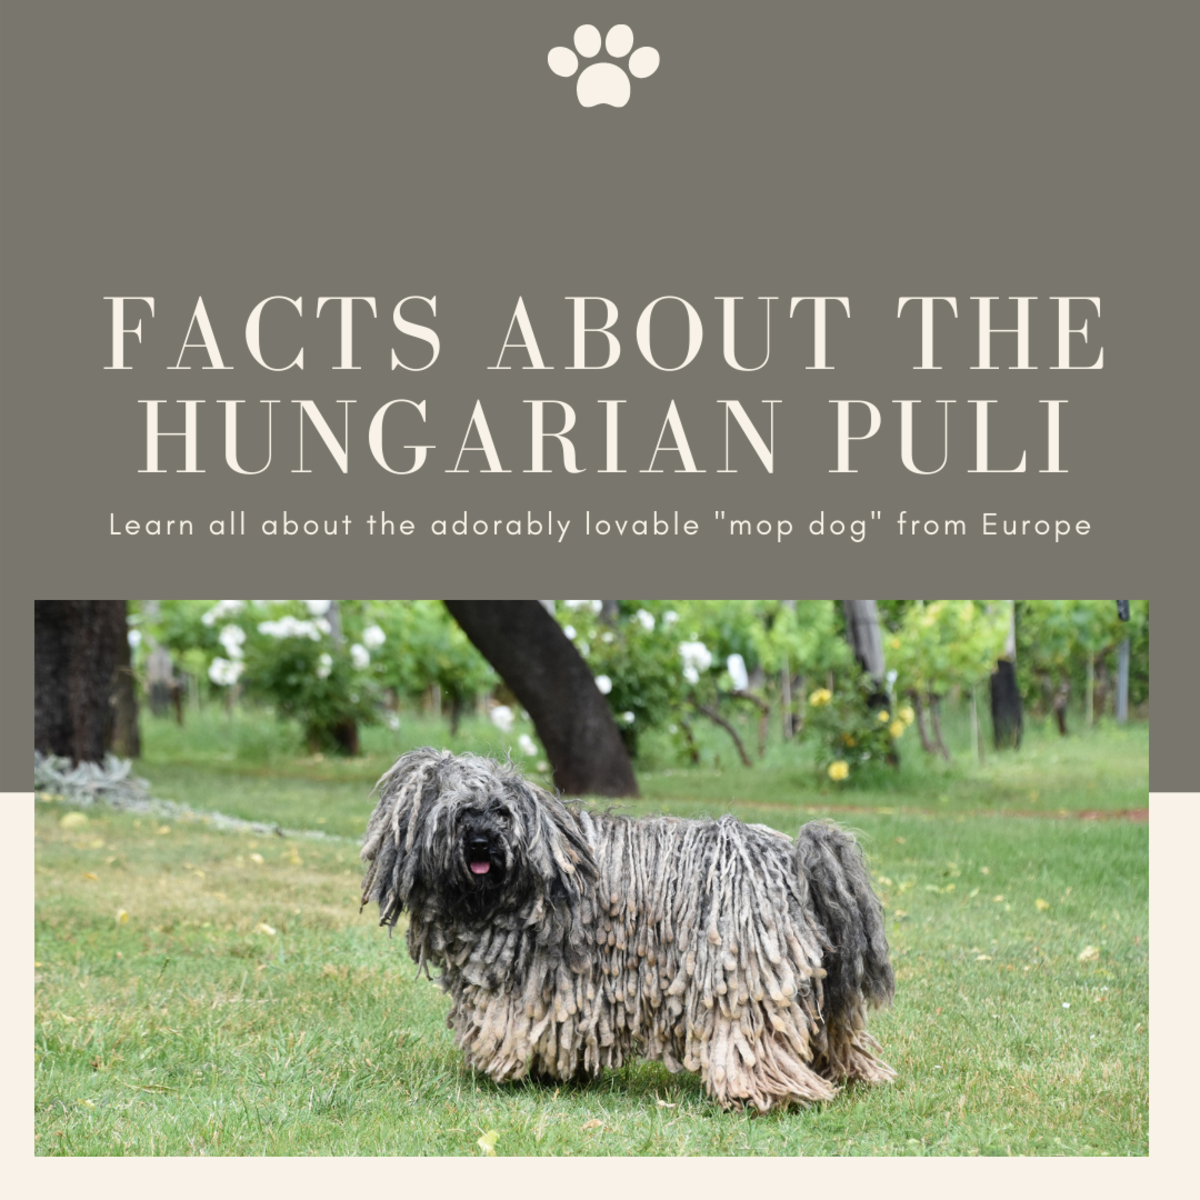 Facts About the Hungarian Puli (or, The Mop Dog)